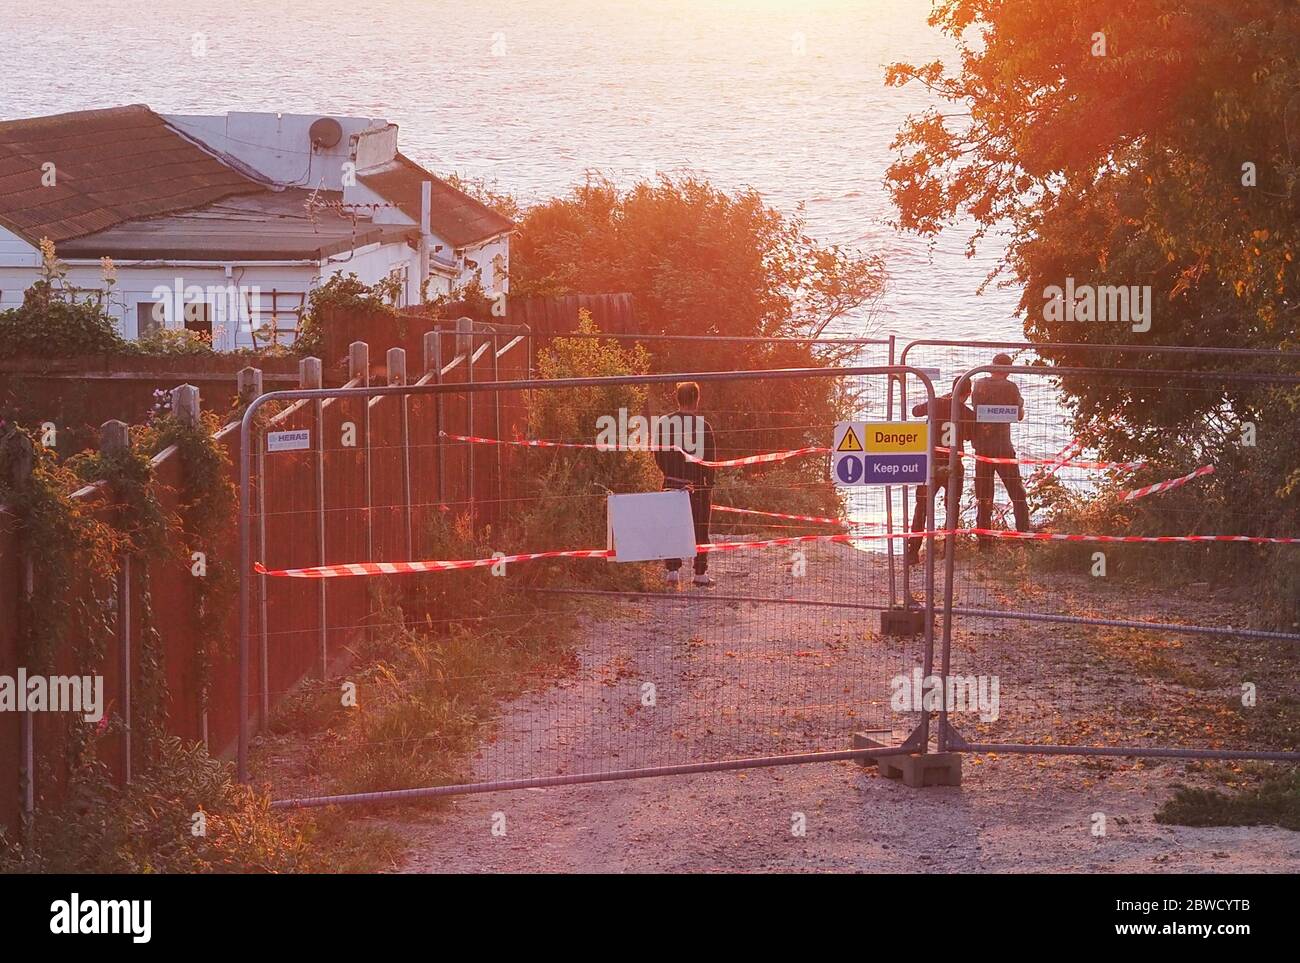 Eastchurch, Kent, UK. 31st May, 2020. Three daredevils were spotted taking a quick look over the collapsed cliff edge in Eastchurch, Kent at sunset this evening - which is at risk of further collapse at any moment -  ignoring three sets of safety barriers put in place by the authorities. Credit: James Bell/Alamy Live News Stock Photo